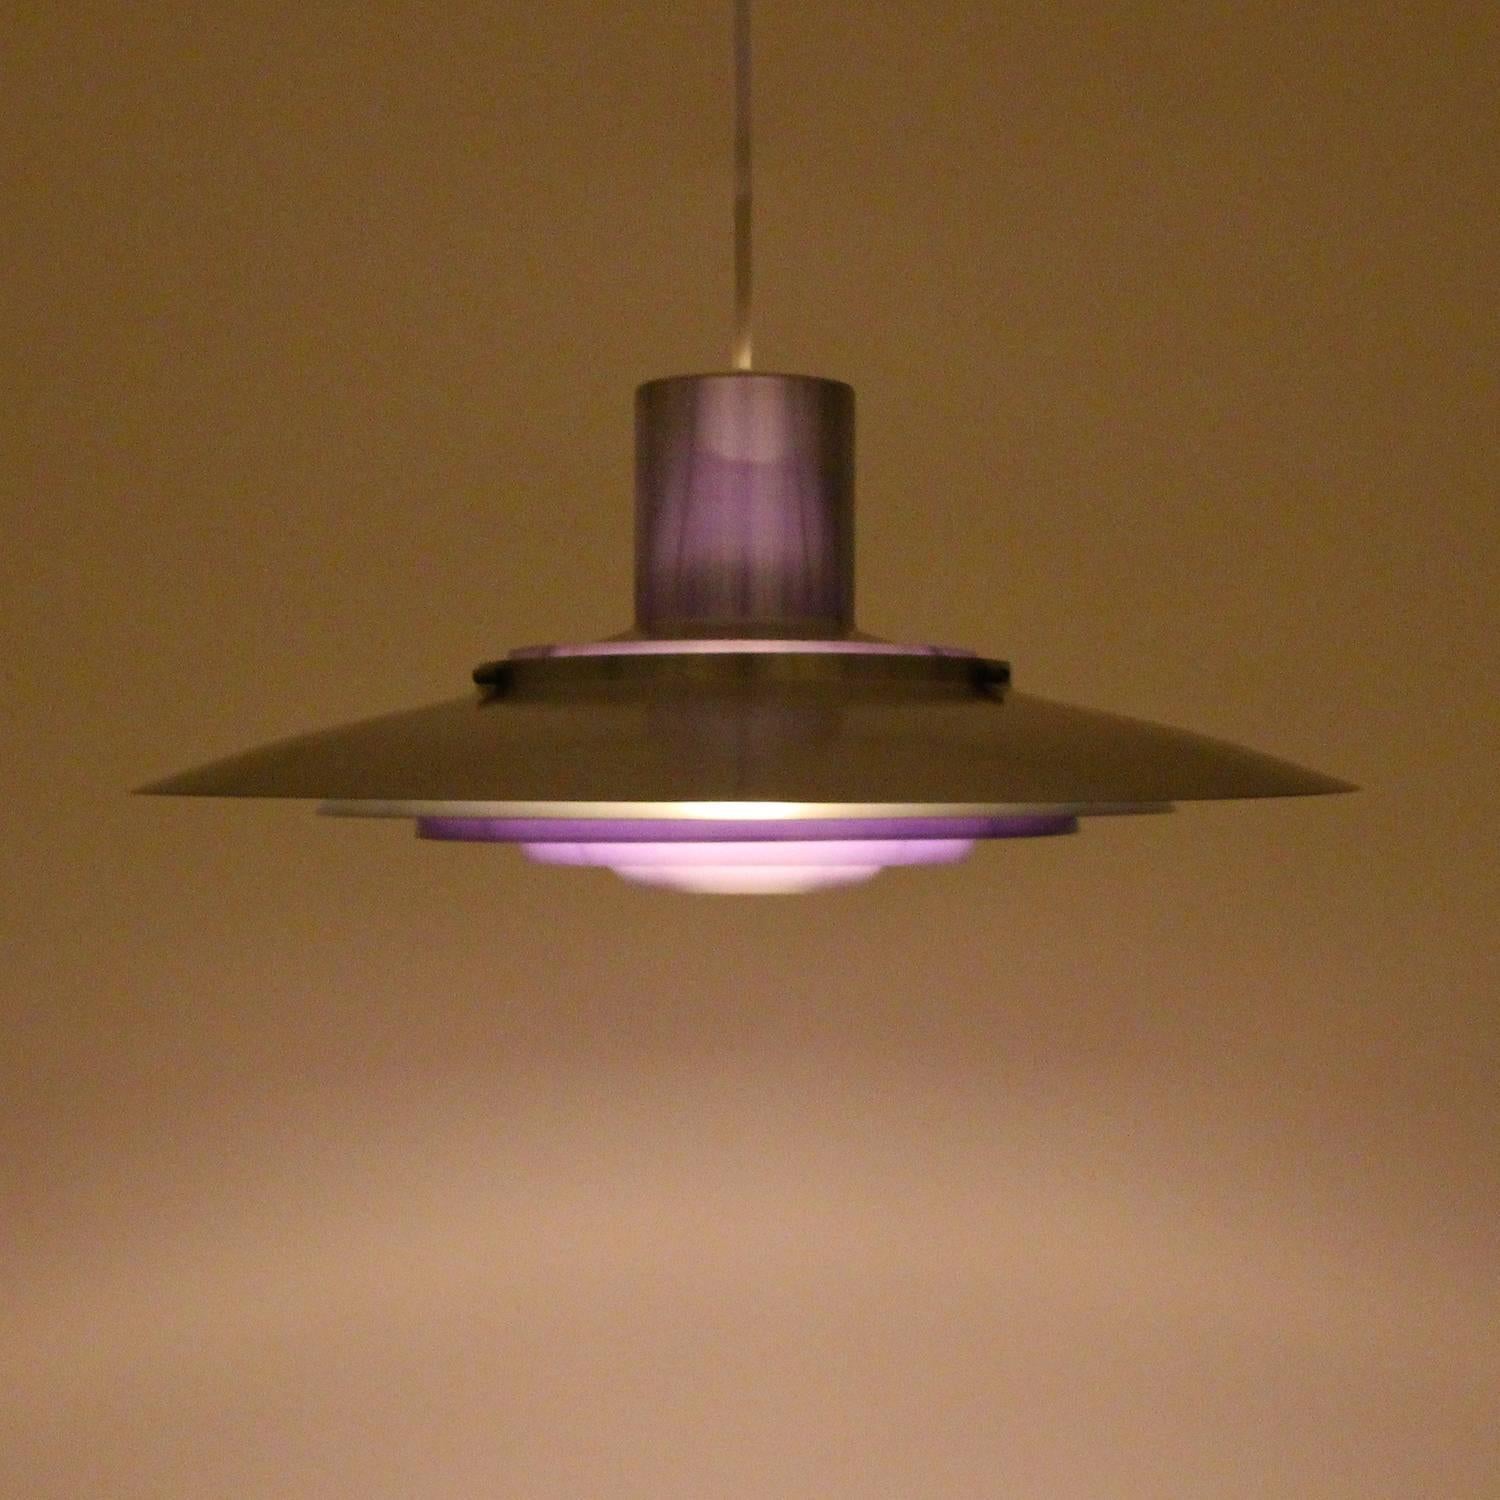 Kastholm pendant by Fabricius & Kastholm for Nordisk Solar Compagni in 1964 - large timeless aluminum and purple hanging light in excellent vintage condition.

A gorgeous piece comprised of five ring-shaped aluminum shades with purple inner